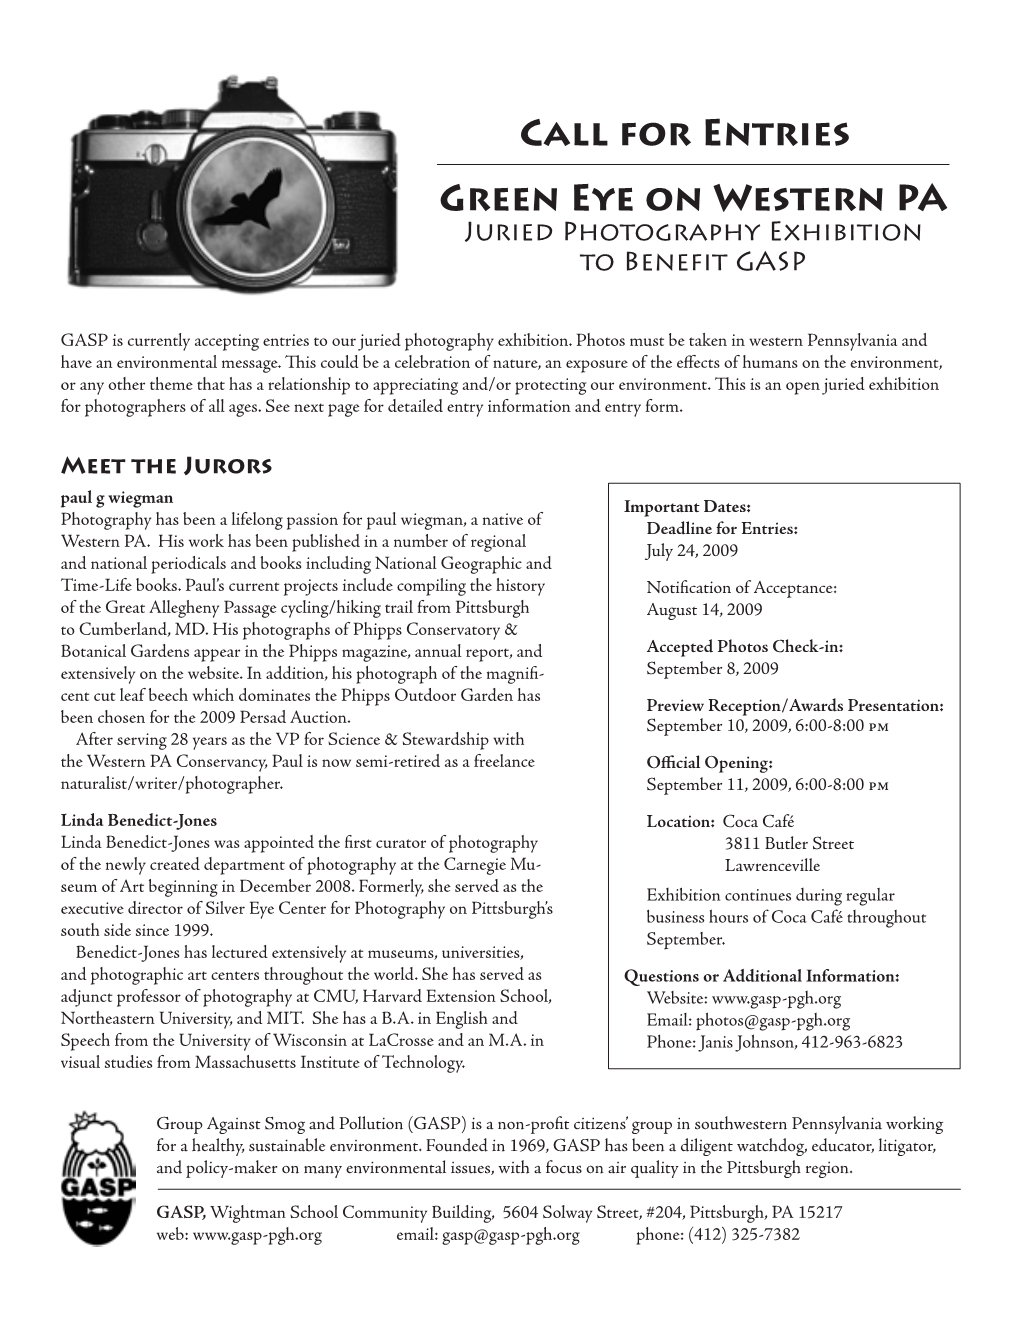 Call for Entries Green Eye on Western PA Juried Photography Exhibition to Benefit GASP